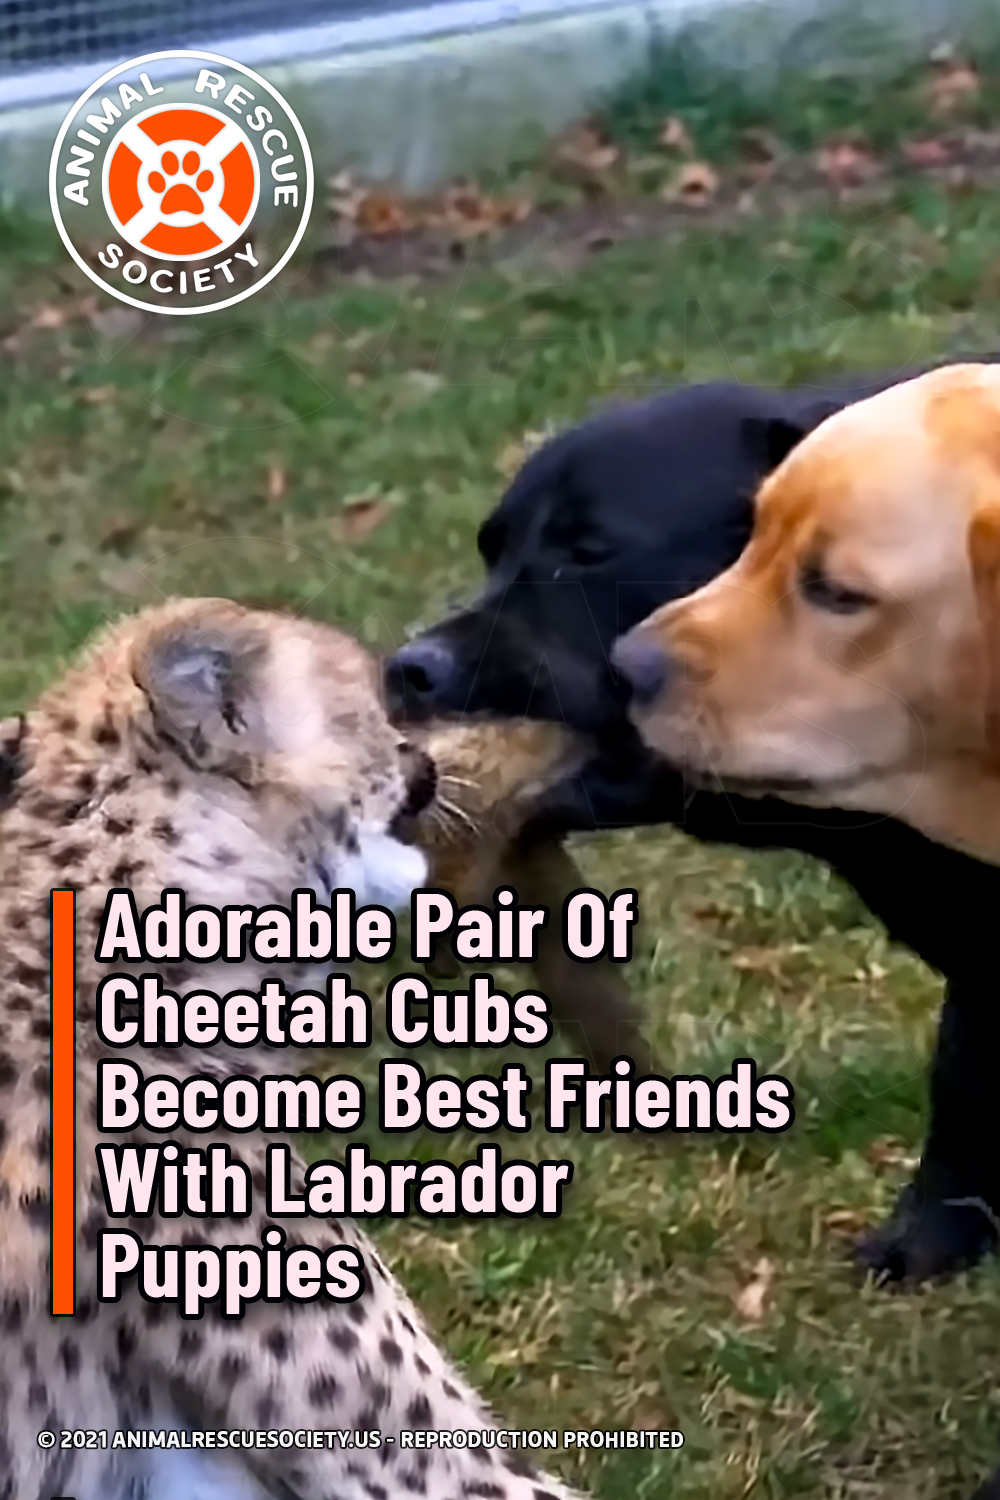 Adorable Pair Of Cheetah Cubs Become Best Friends With Labrador Puppies